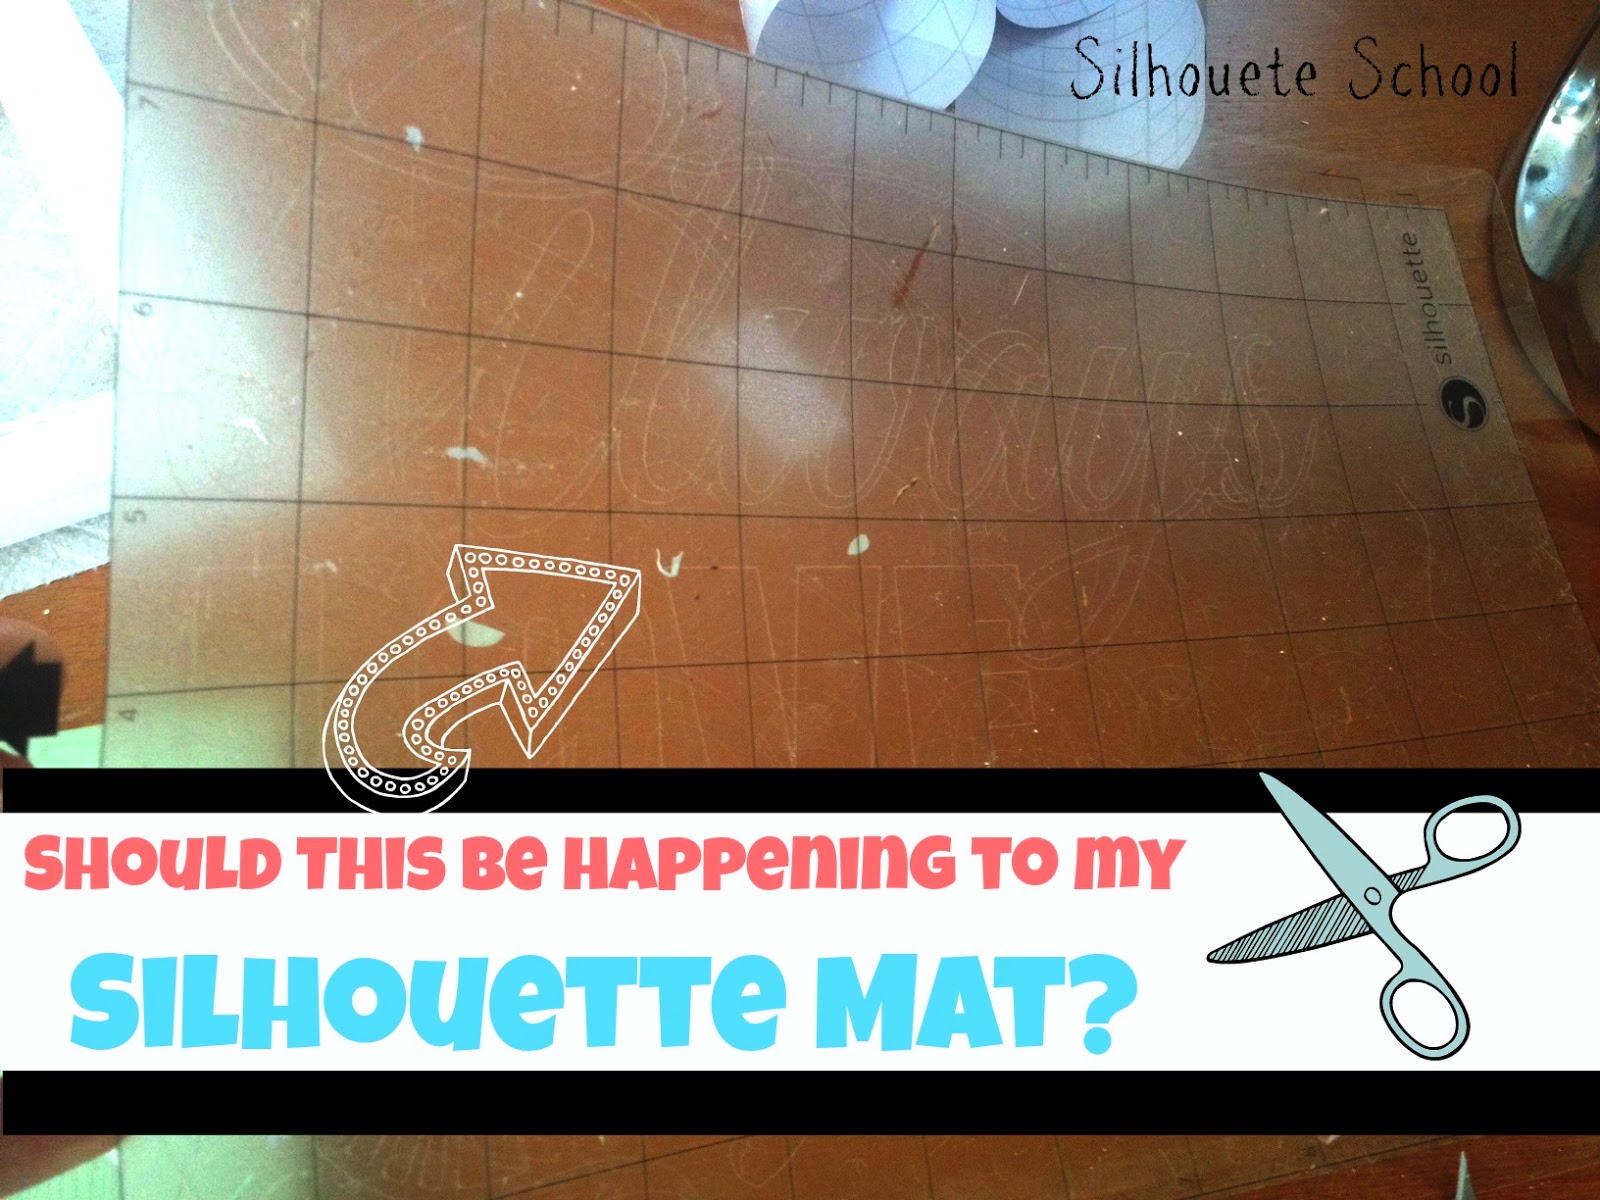 Resticking Silhouette Mat: Cutting Mat Spray Adhesive Review - Silhouette  School